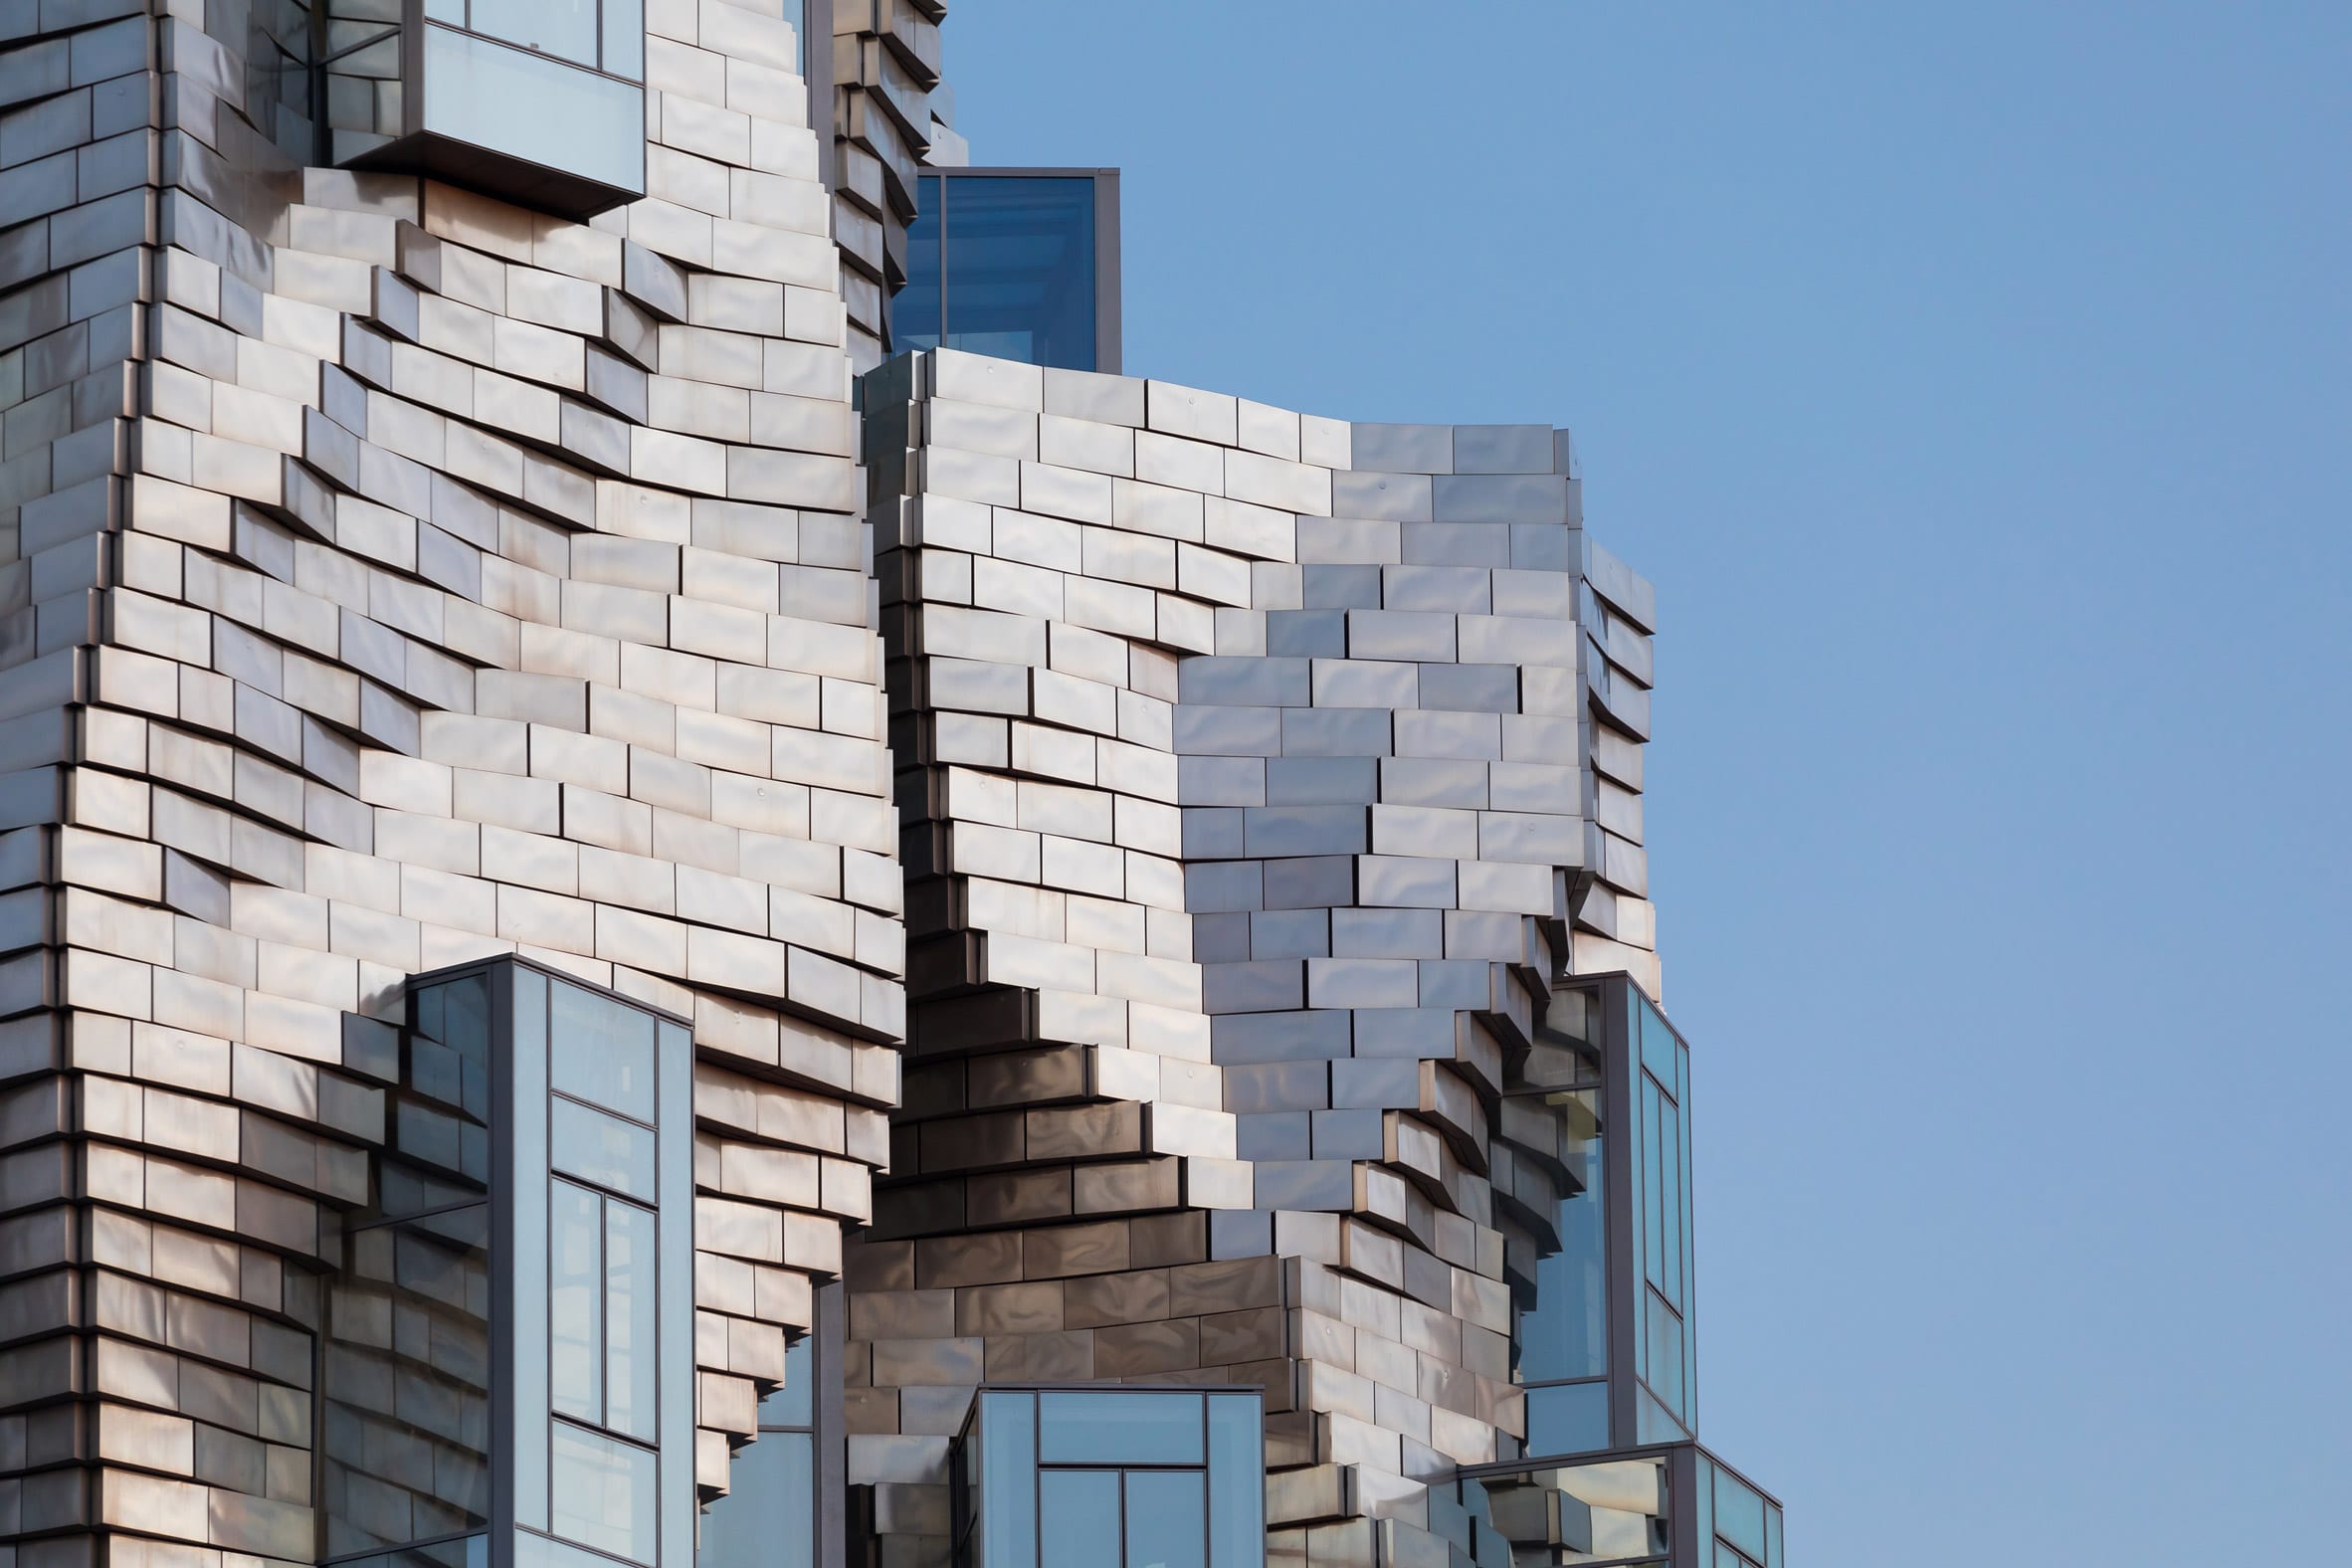 Iconic building alert: waiting for the Frank Gehry effect in Sydney